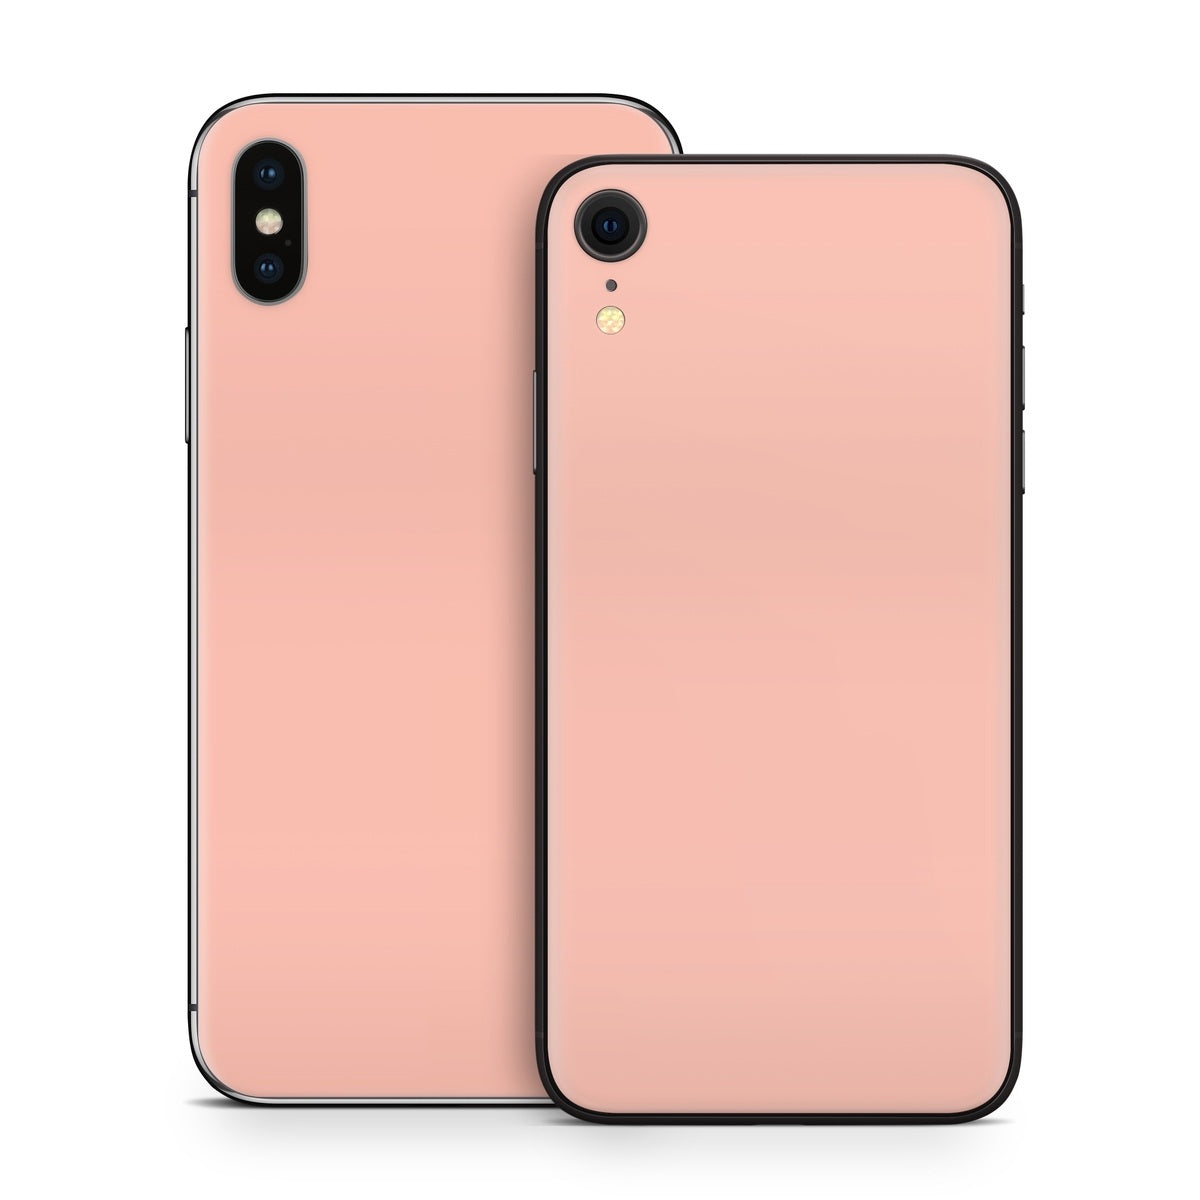 Solid State Peach - Apple iPhone X Skin